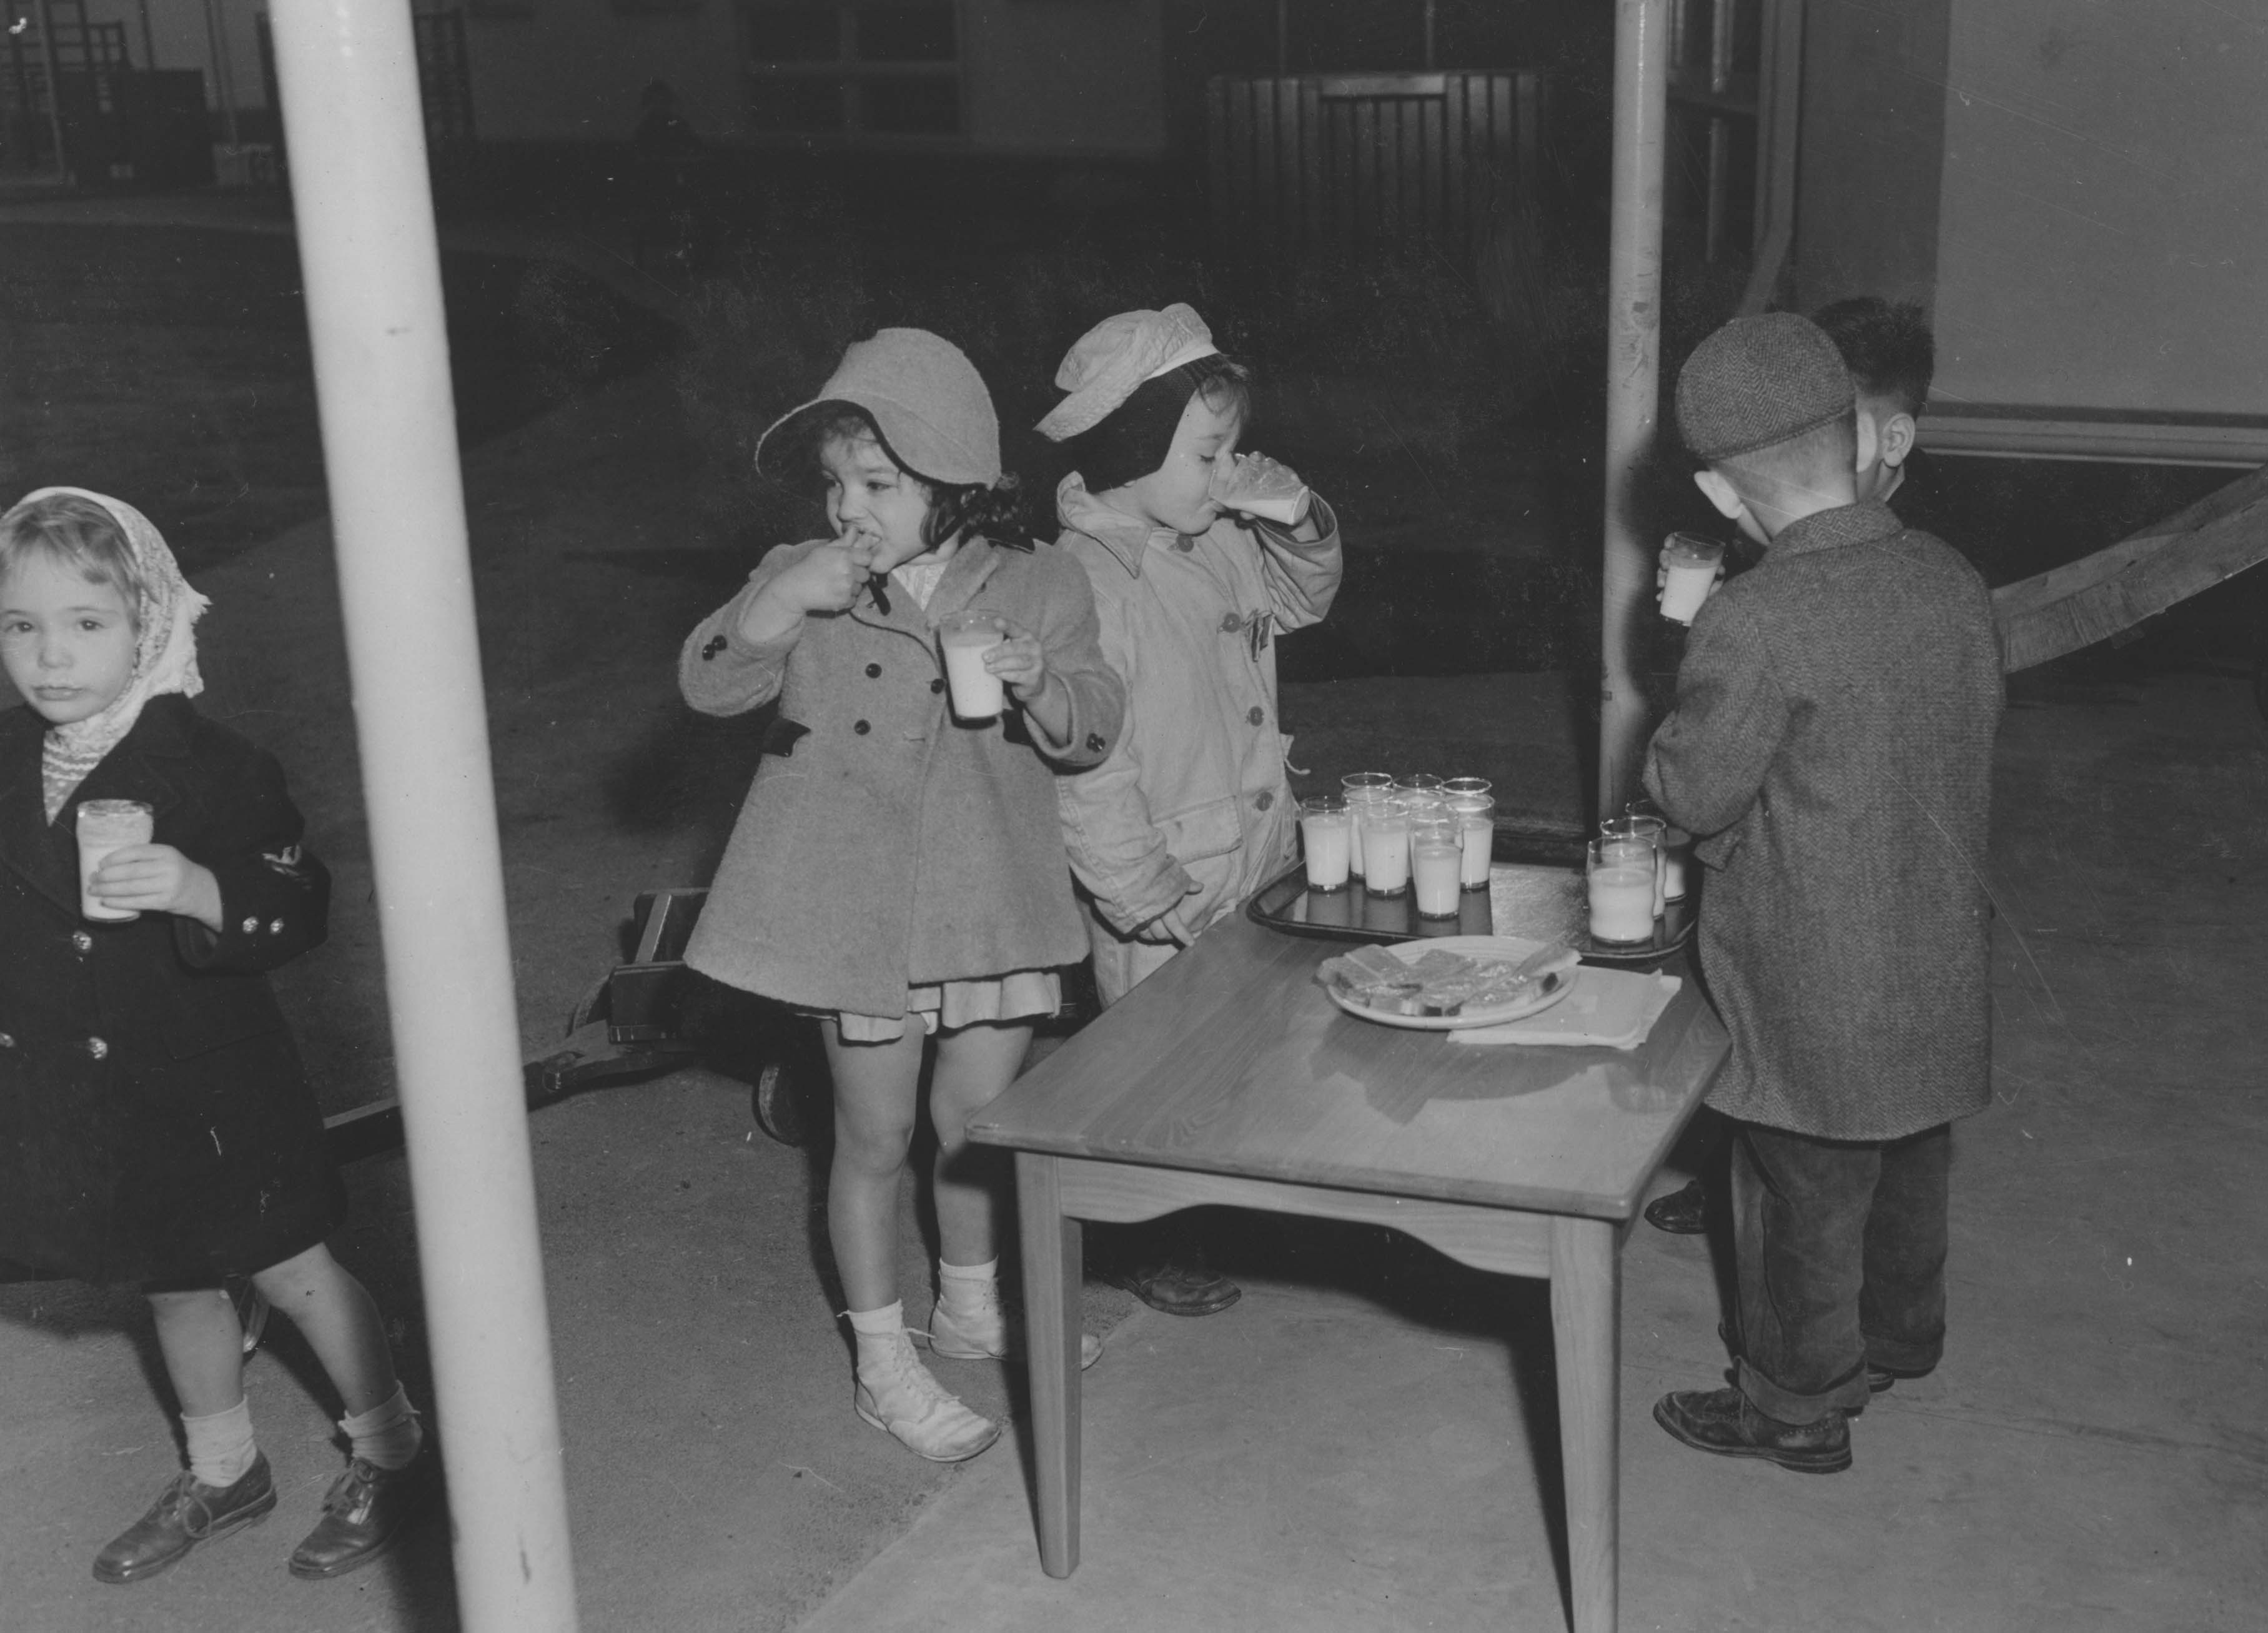 Black and white image from the 1940's of young boys and girls having a snack.